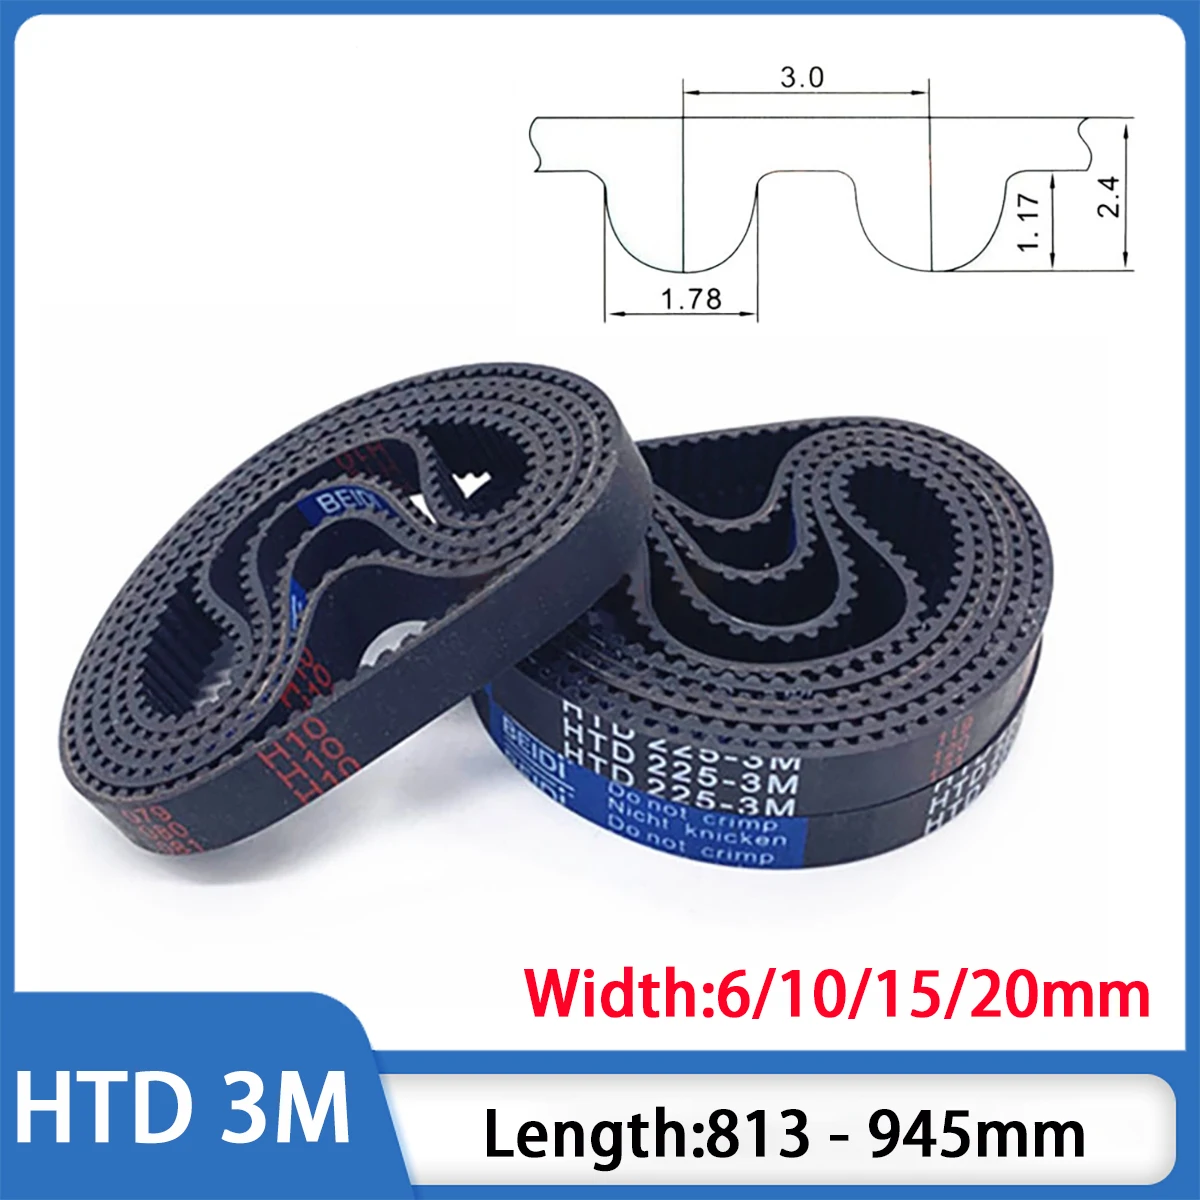 

Drive Belts Width 6/10/15/20mm HTD-3M Rubber Closed Loop Timing Belt Pitch 3mm Length 813 825 831 840 - 945mm